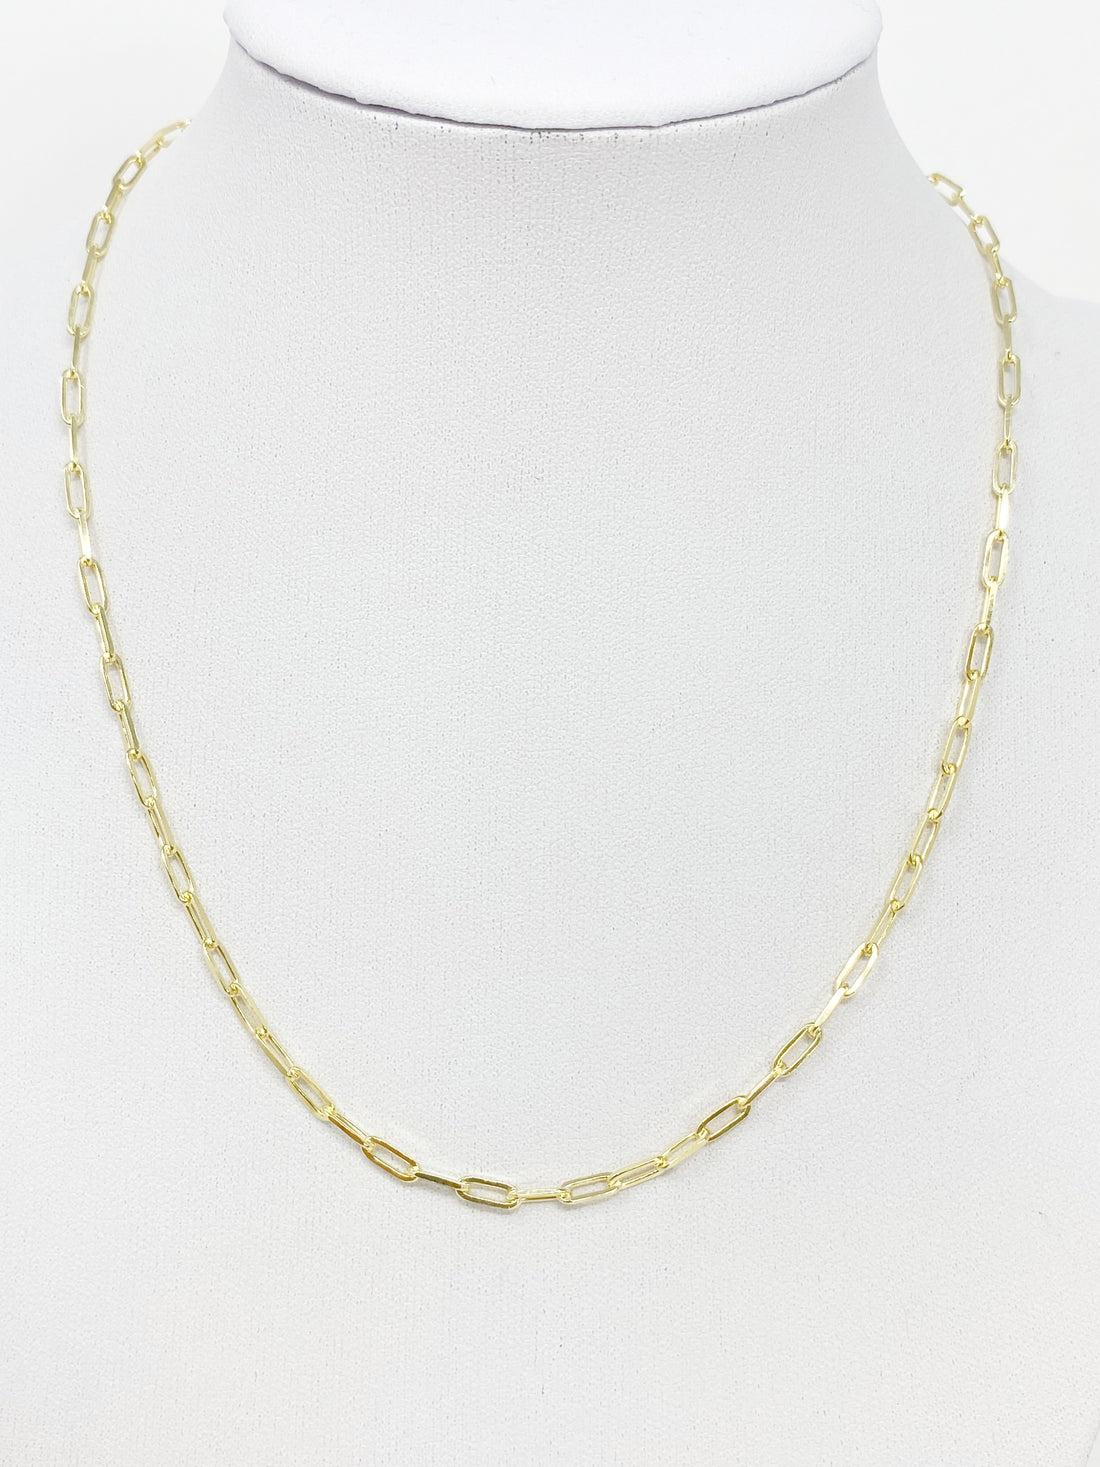 Charming Chainlink Necklace in Gold 16"